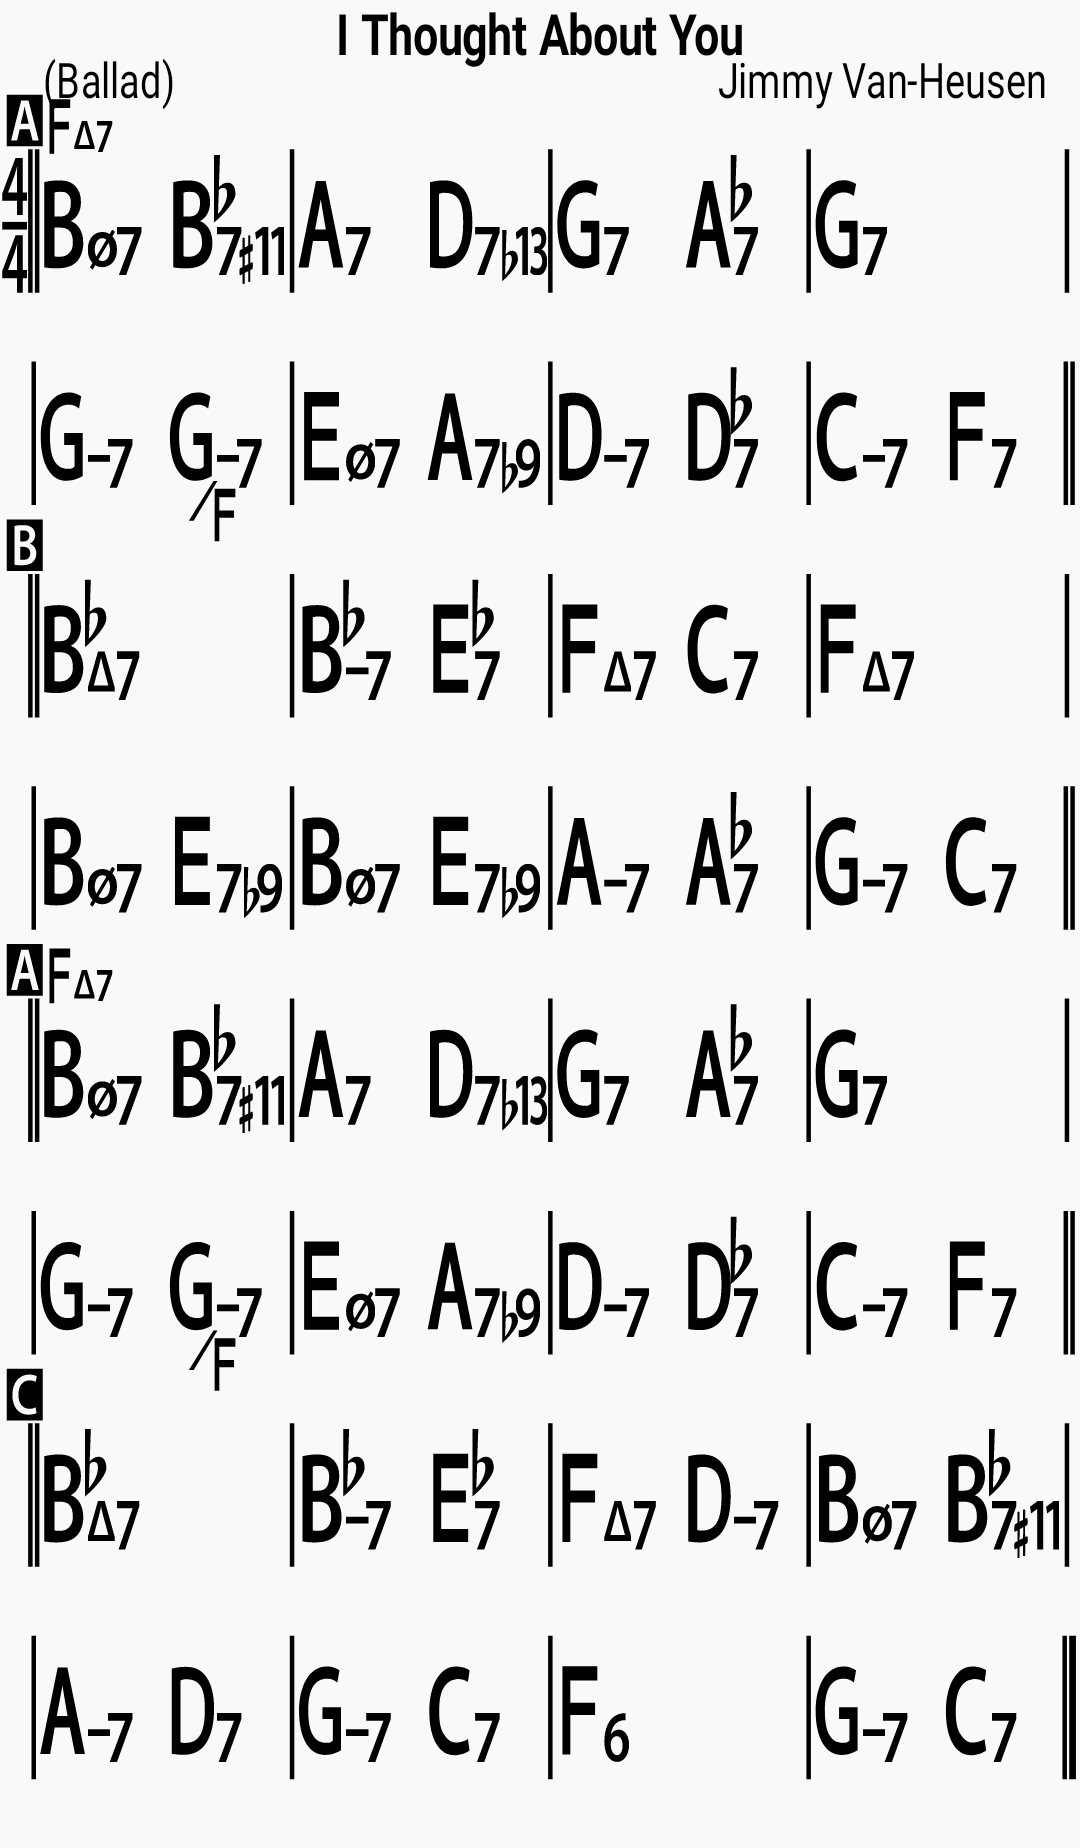 Chord chart for the jazz standard I Thought About You